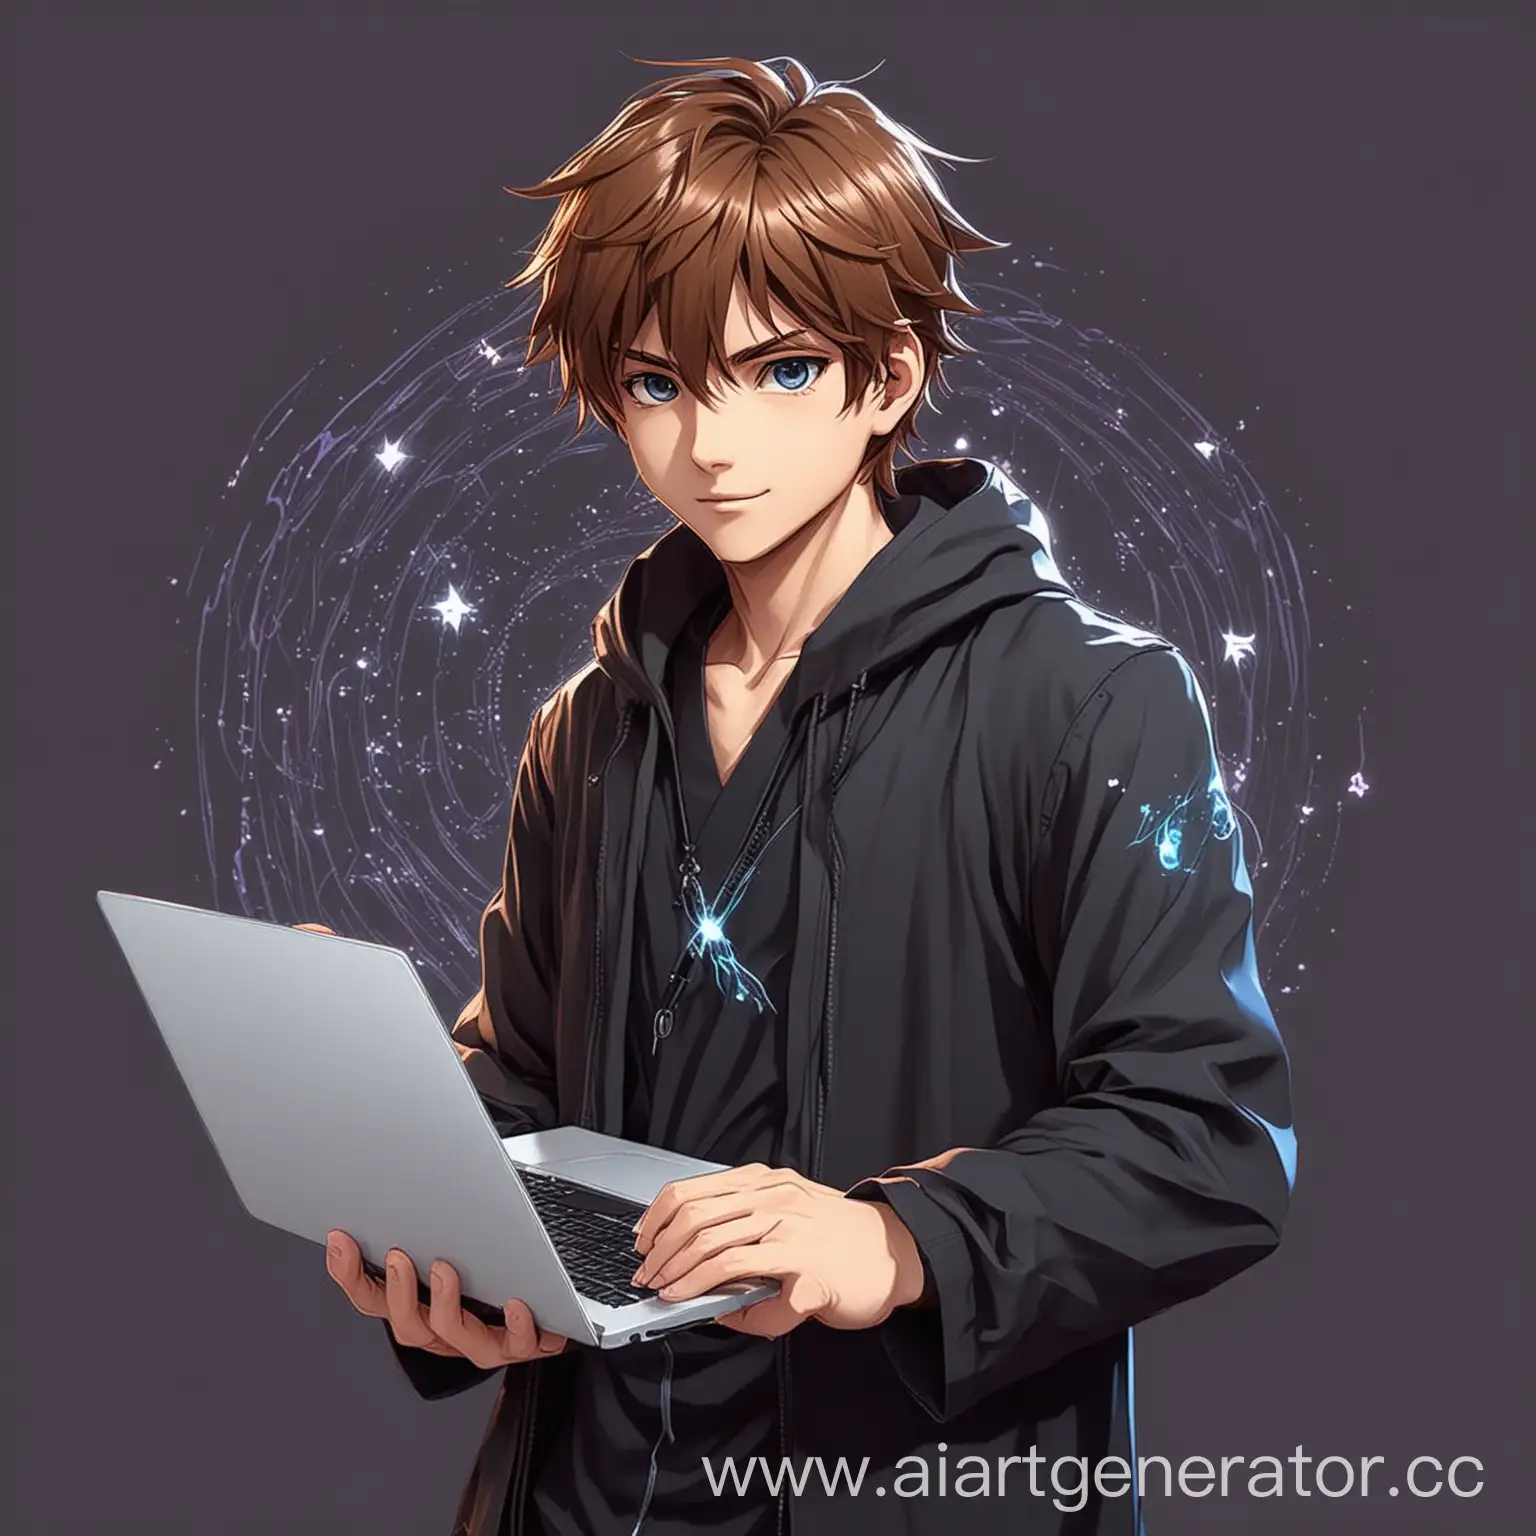 Magical-Anime-Character-with-Laptop-Digital-Wizardry-in-Action